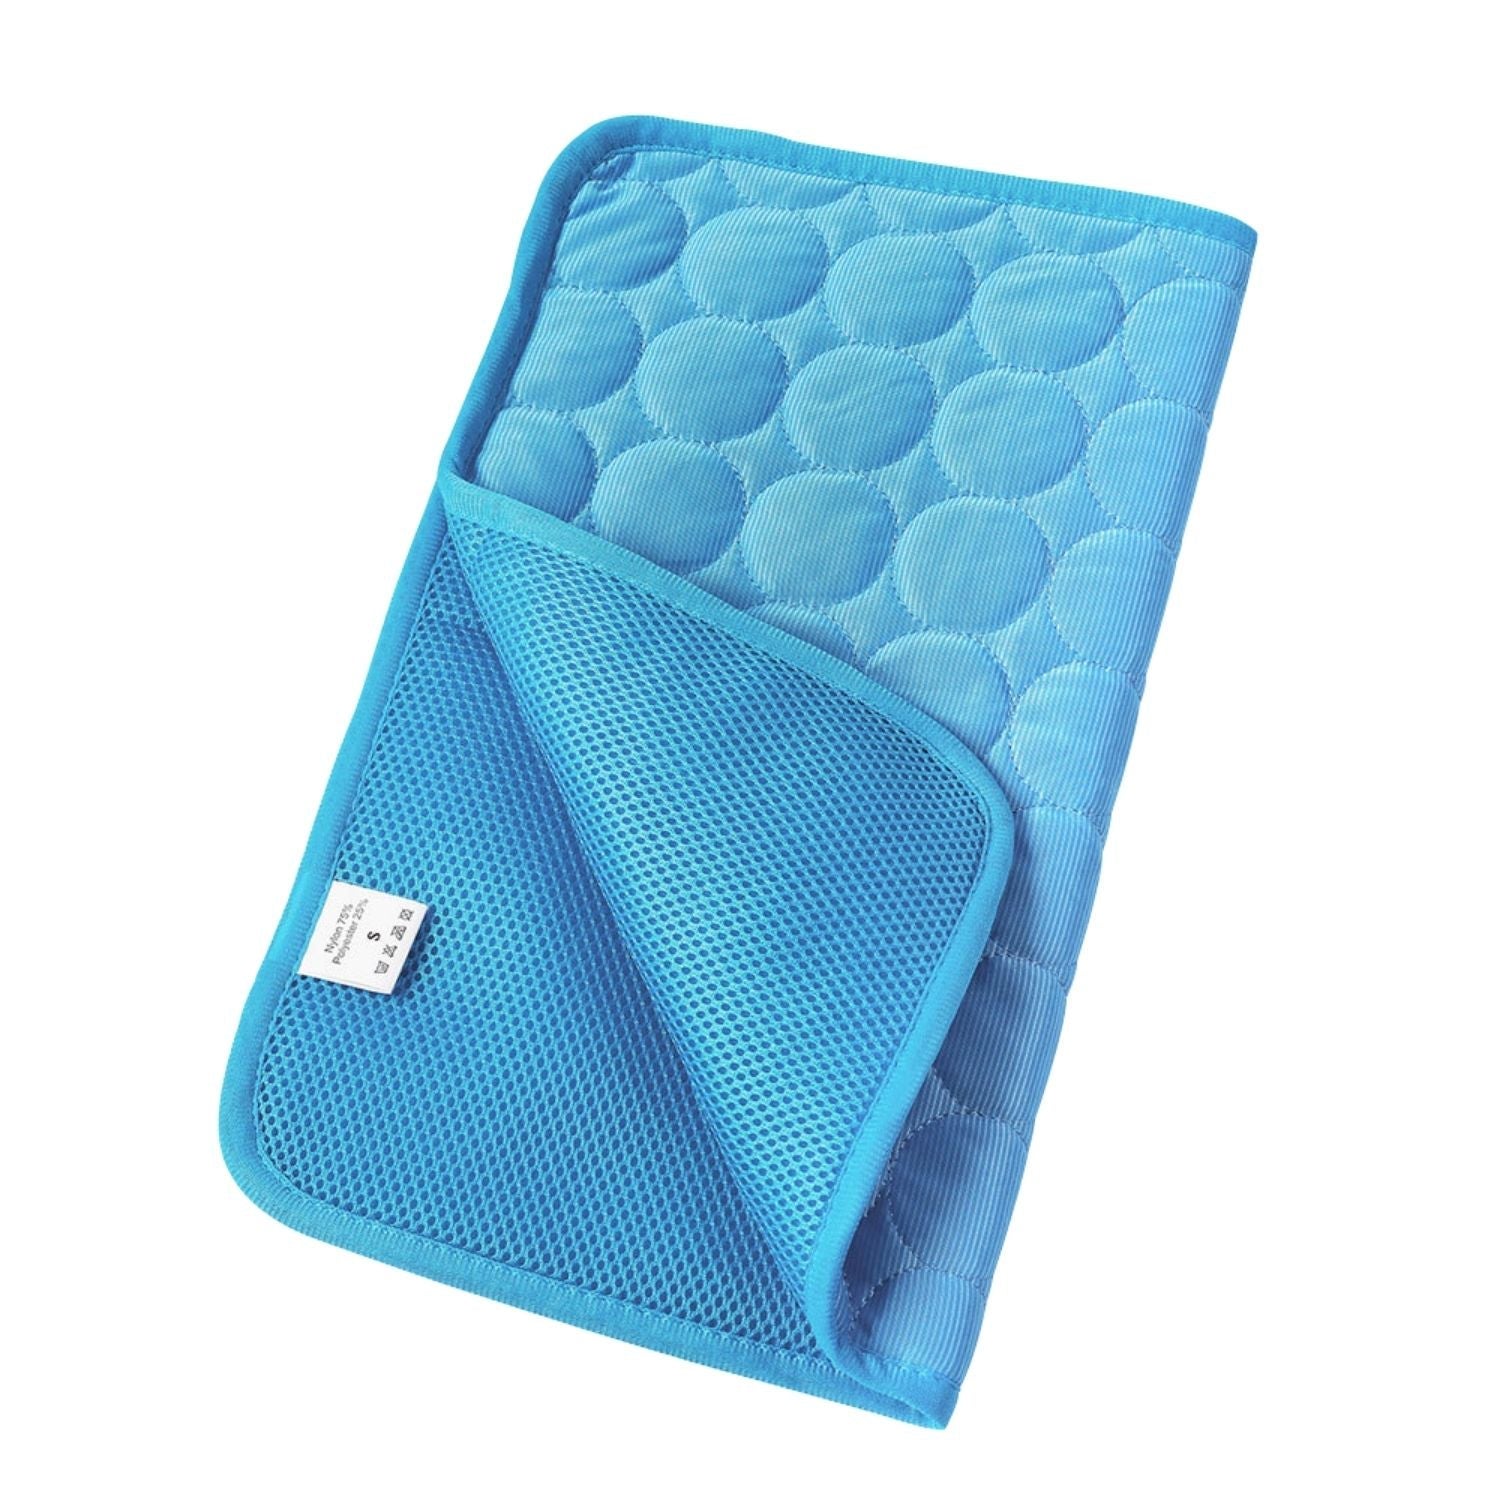 Floofi Pet Cool Gel Mat Dog Cat Puppy Bed Non-Toxic Cooling Dog Summer Water Pad